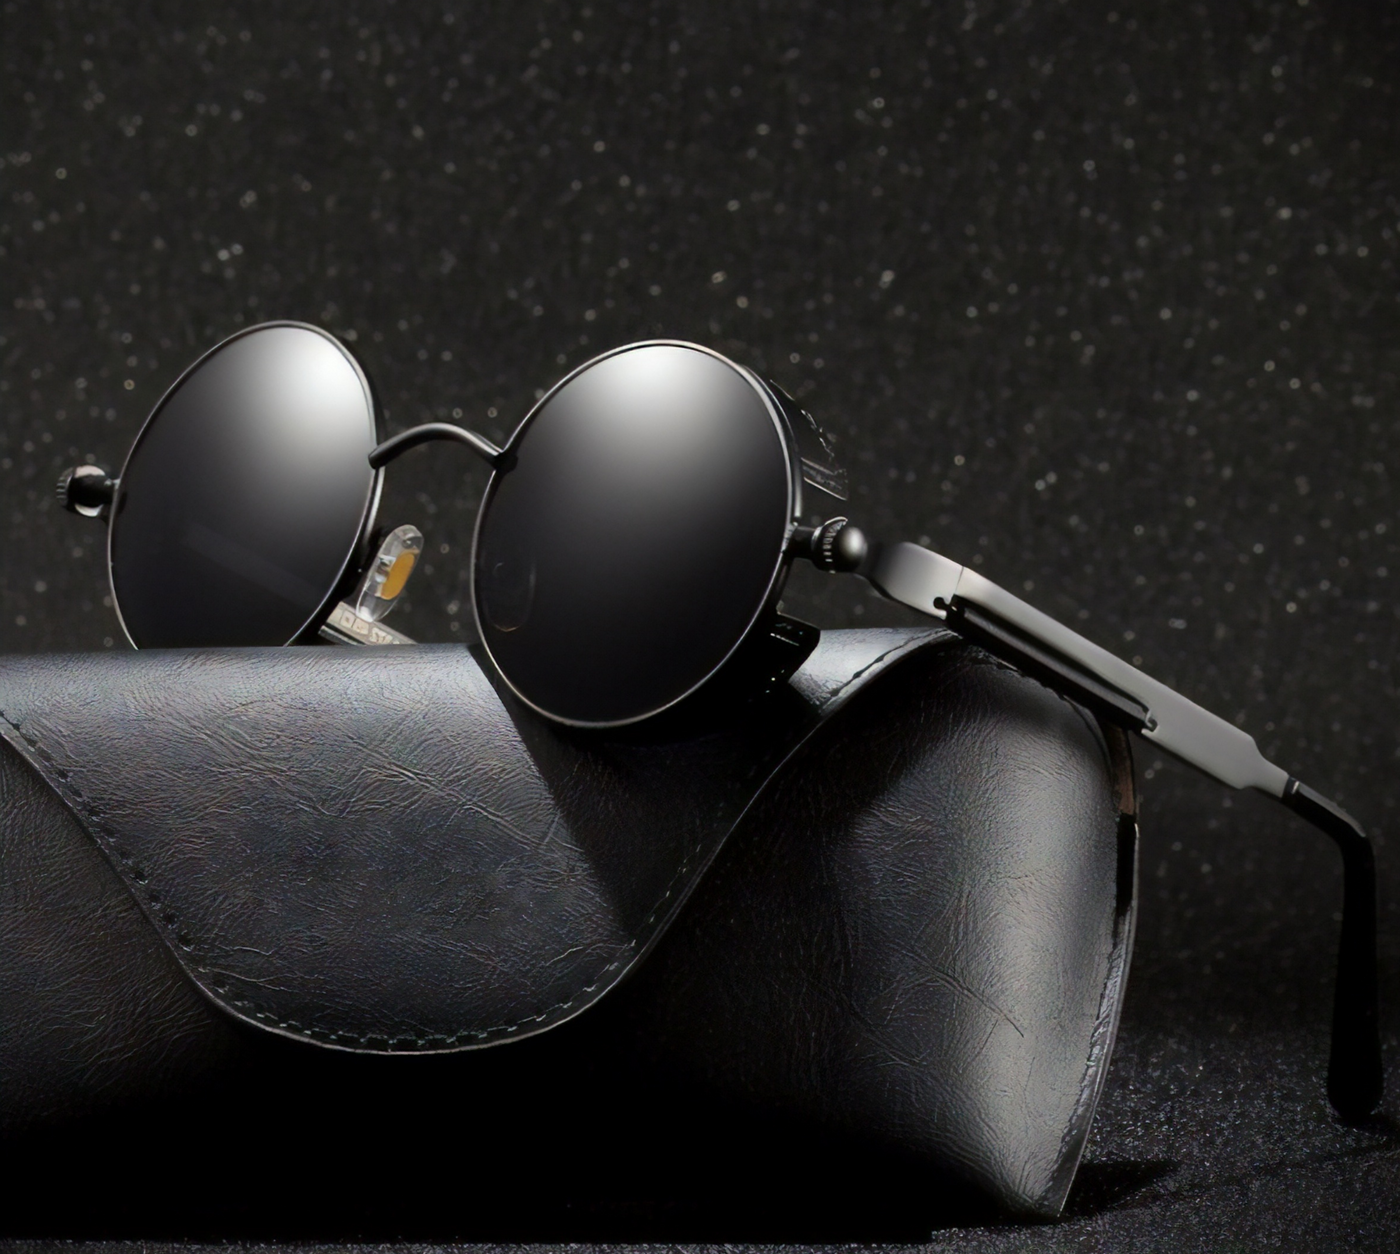 Classic Wilcox Black Eyewear For Men And Women-Unique and Classy